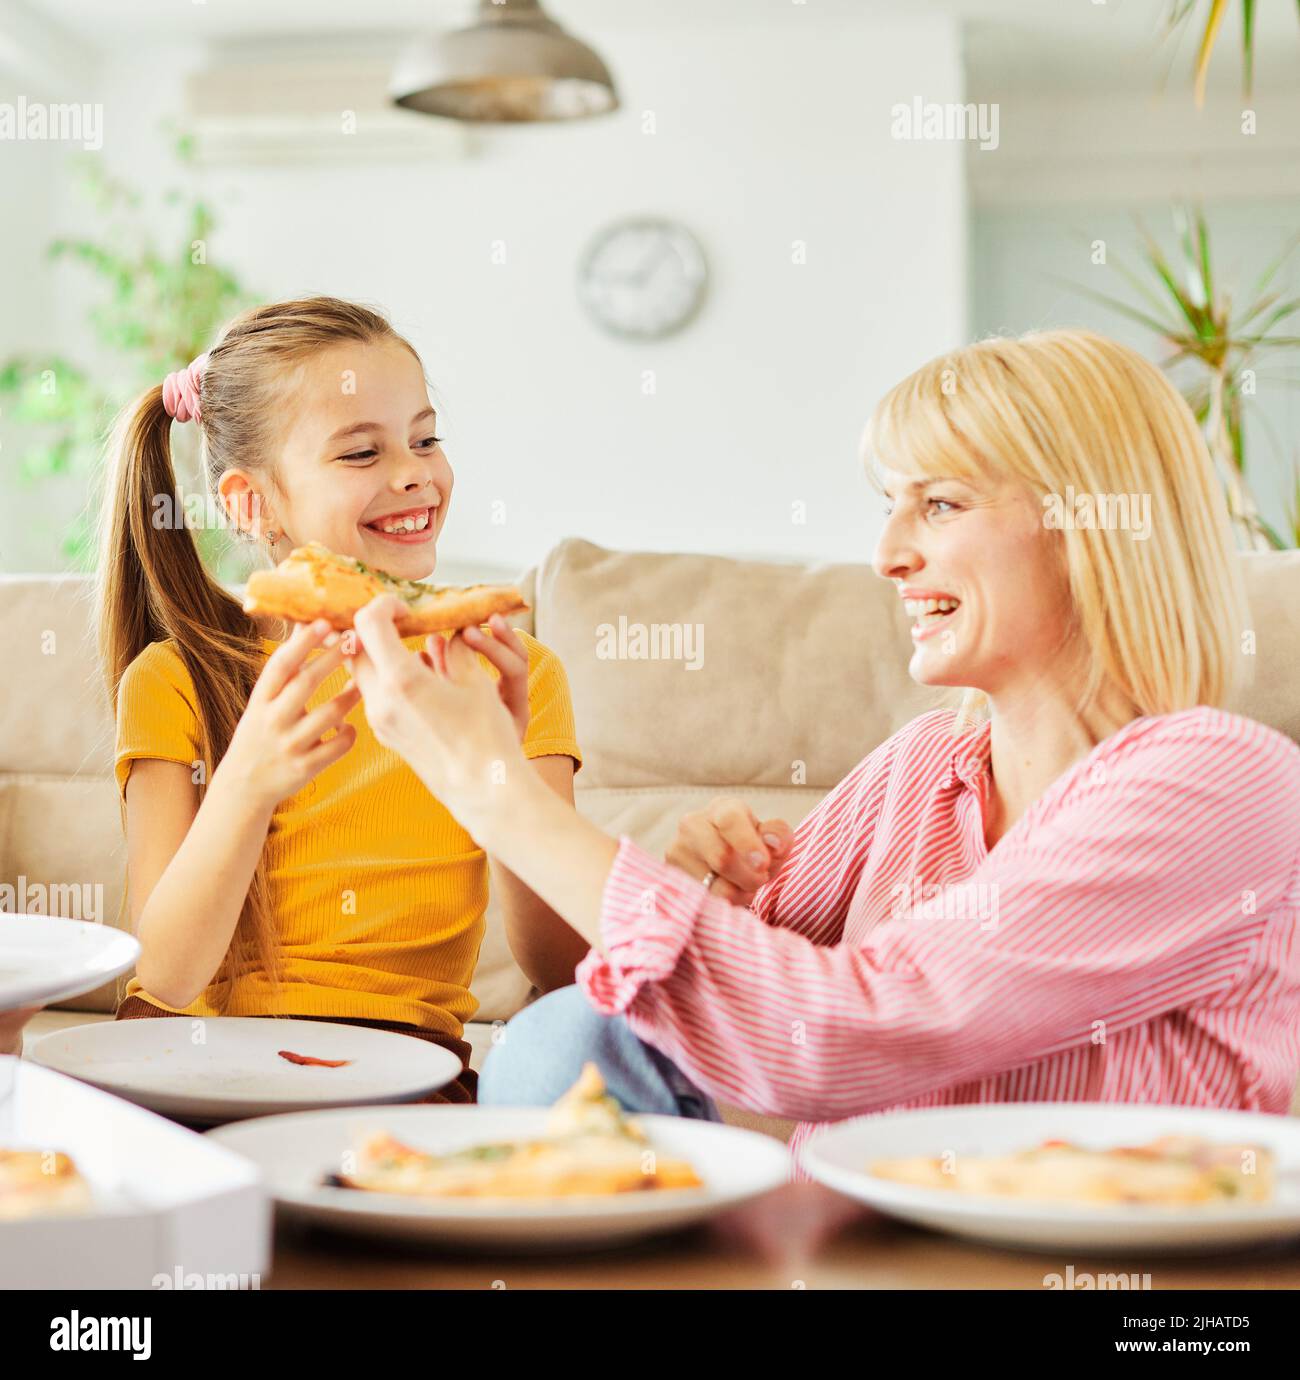 pizza family child food home eating daughter mother happy meal together lunch dinner woman girl fun Stock Photo